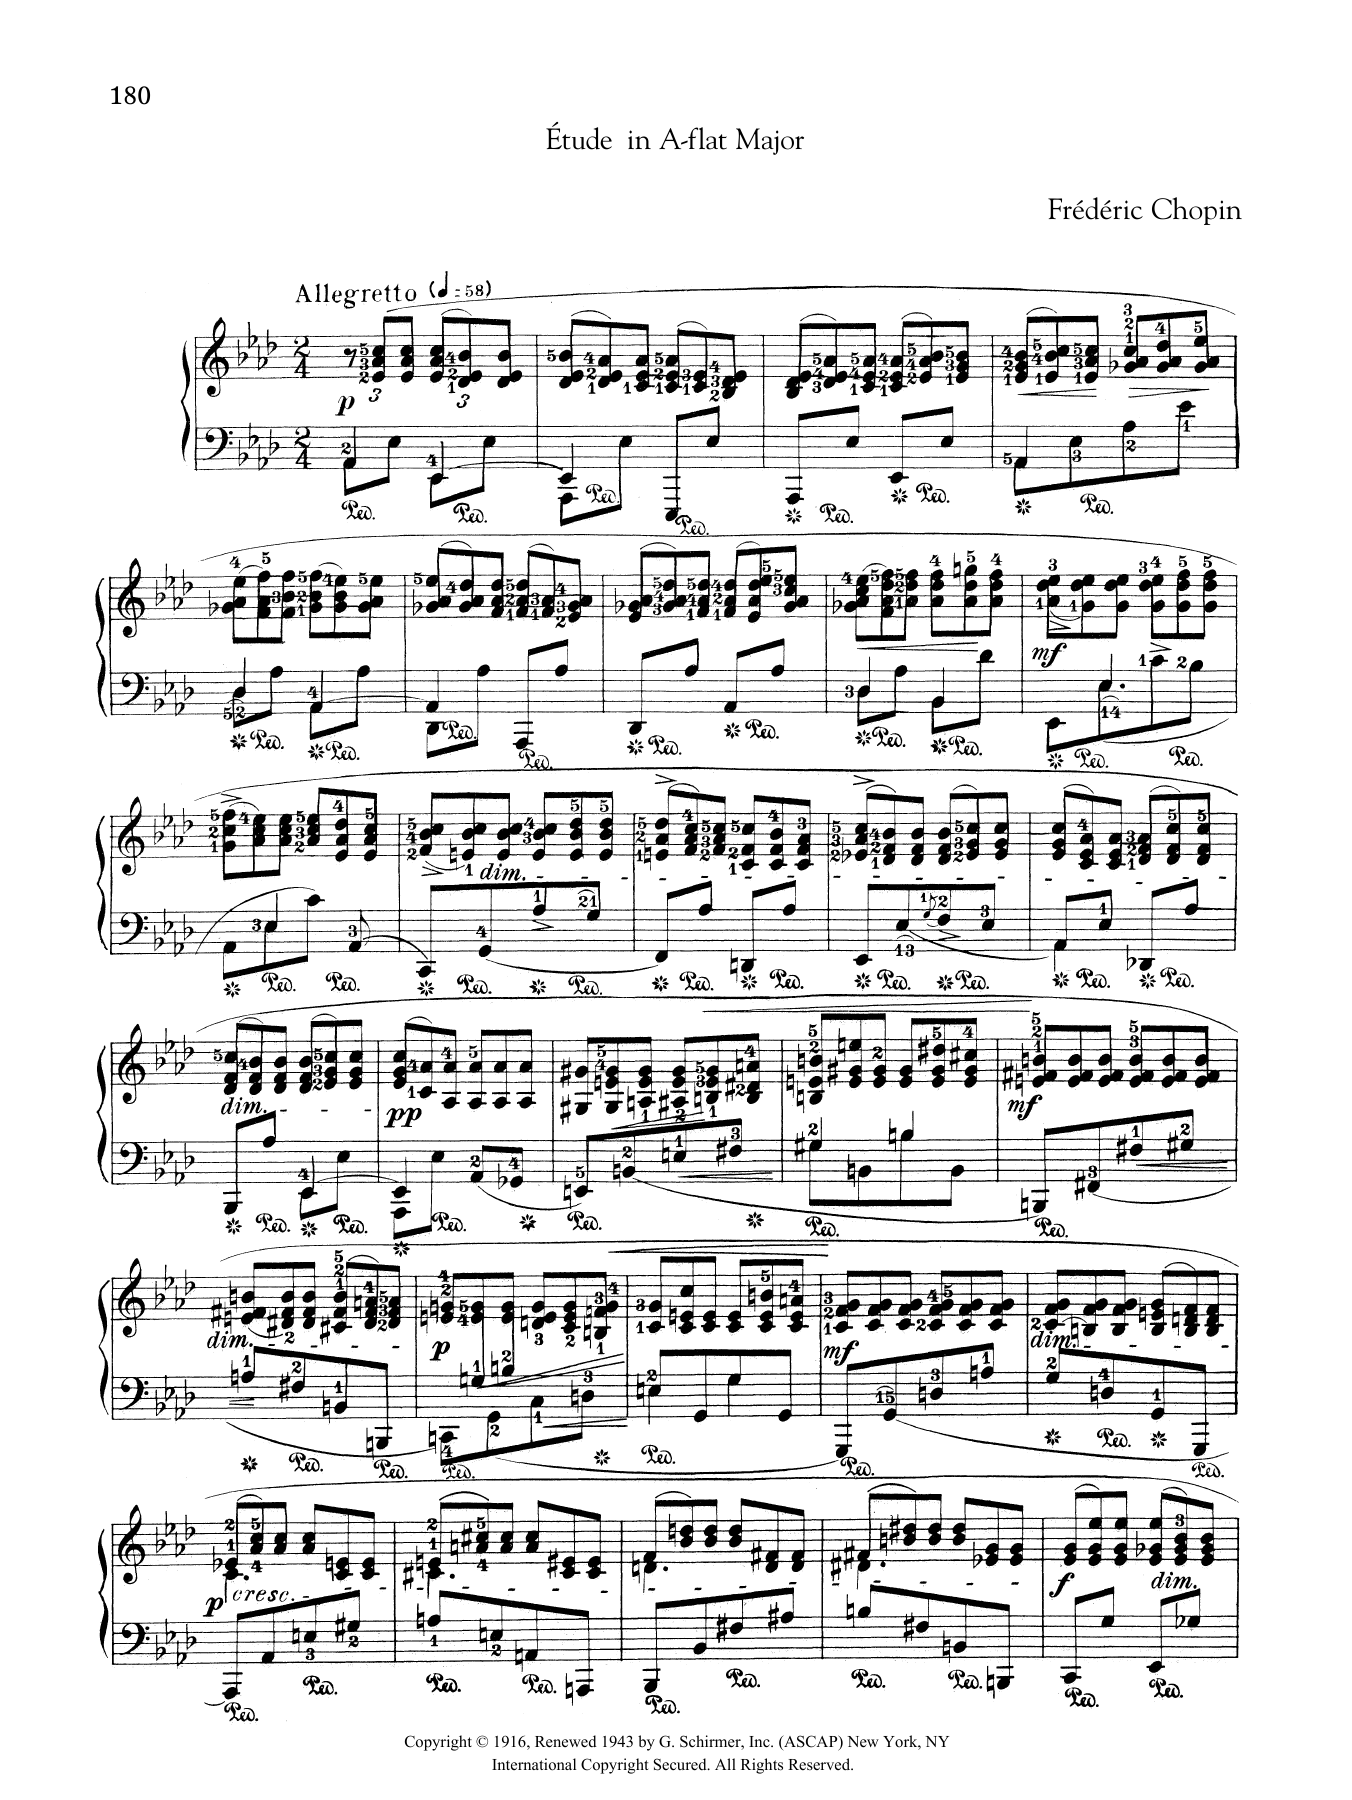 Download Frederic Chopin Etude in A-flat Major, from Trois Nouve Sheet Music